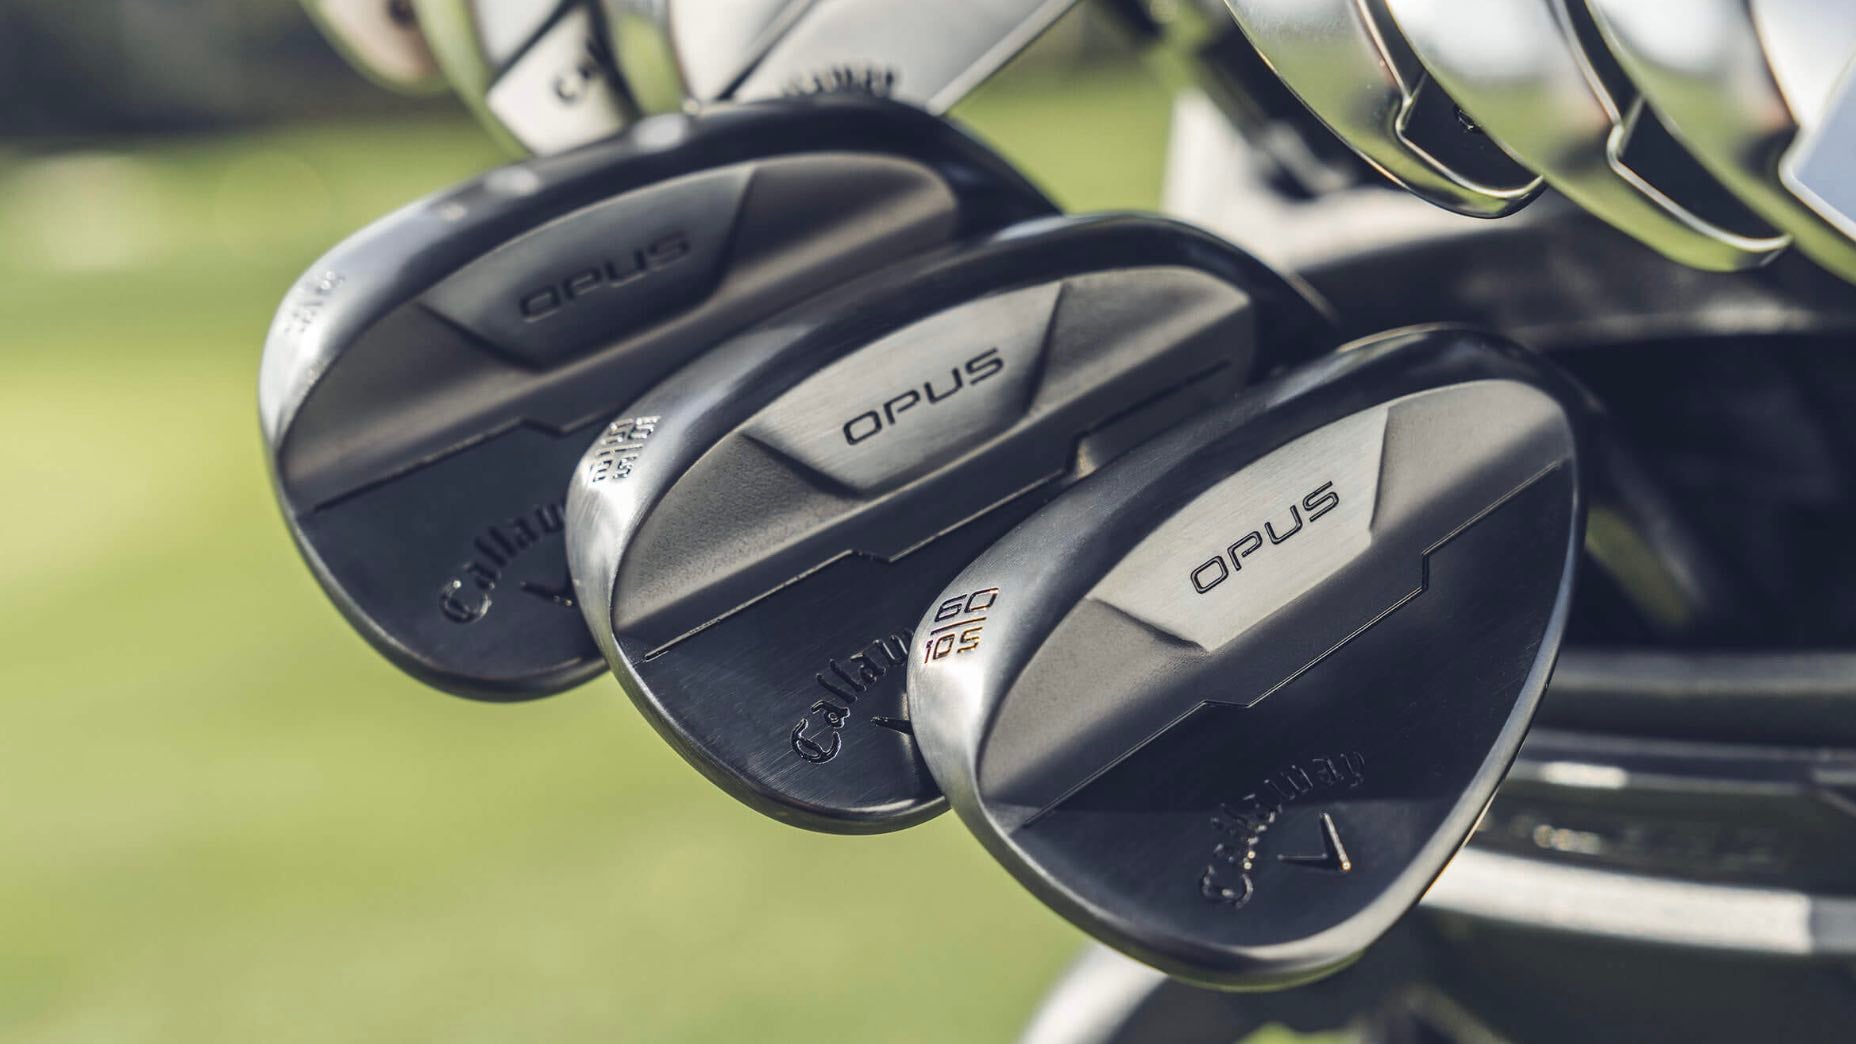 Callaway’s new Opus wedges deliver a fresh look and added spin